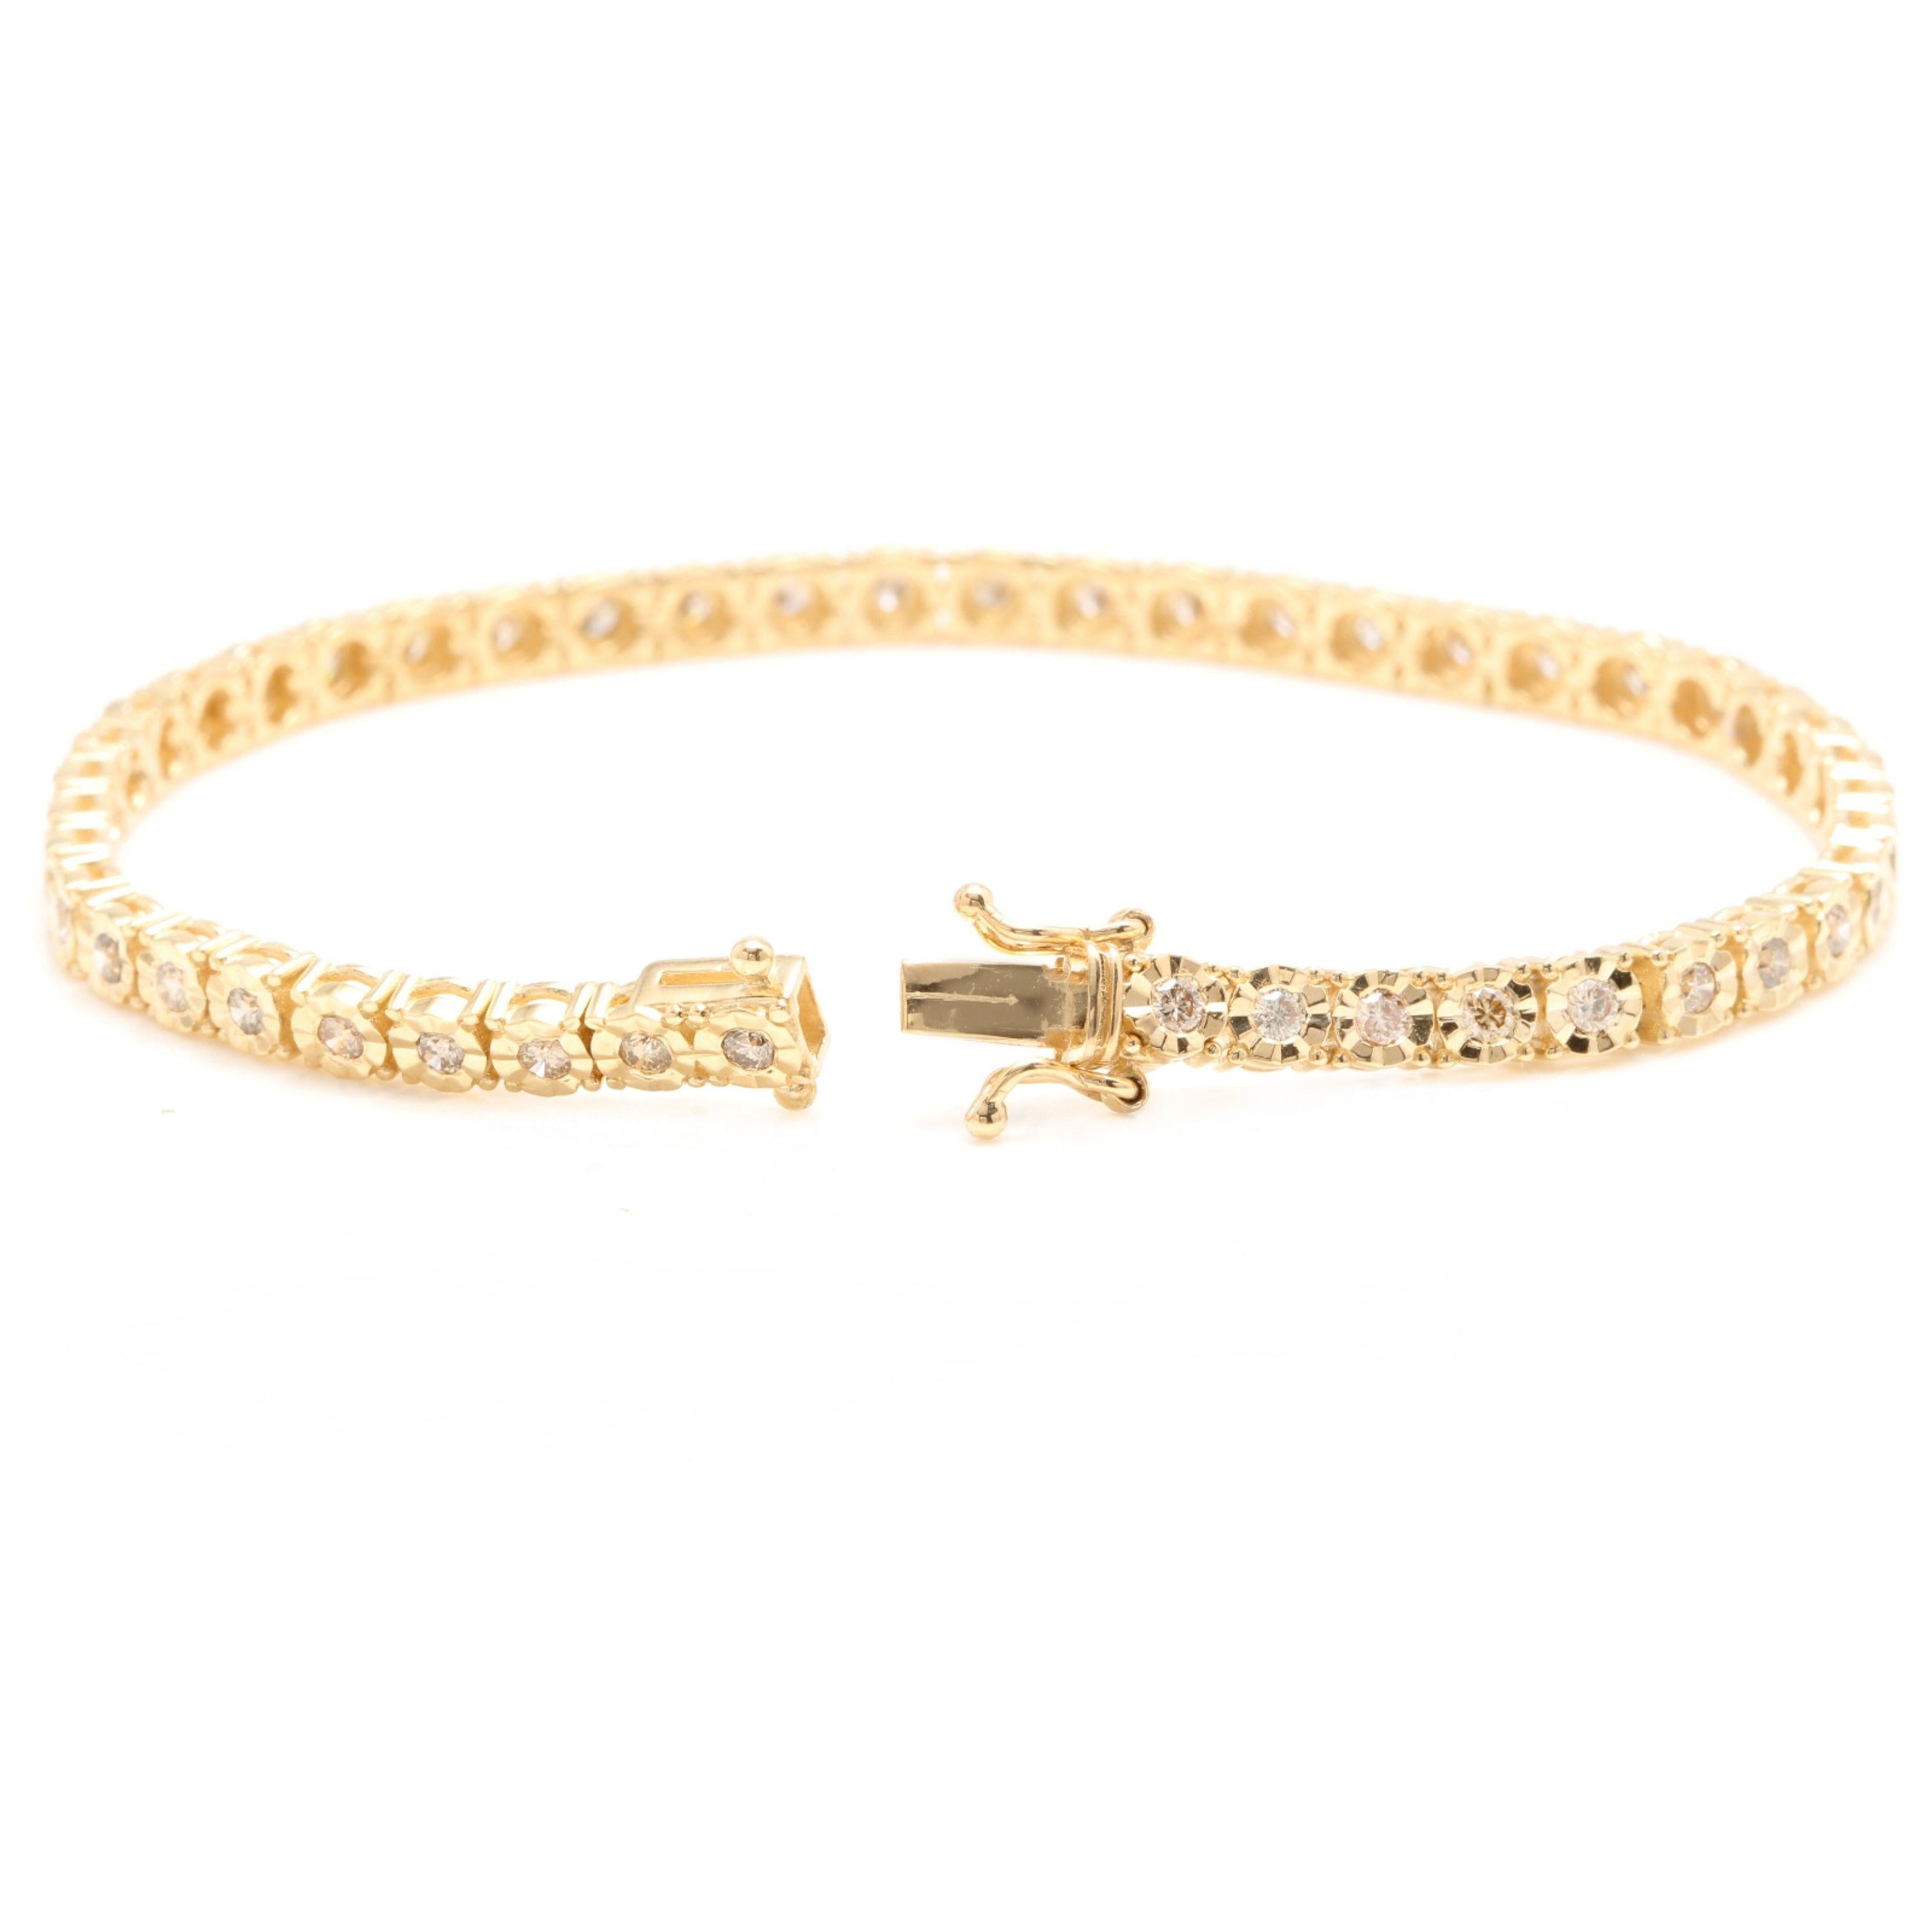 Very Impressive 1.50 Carats Natural Diamond 14K Solid Yellow Gold Tennis Bracelet

STAMPED: 14K

Total Natural Round Diamonds Weight: Approx. 1.50 Carats (46pcs.) (color J-K / Clarity SI1-SI2)

Bracelet Length is:  7 inches

Width: 3.75mm

Bracelet